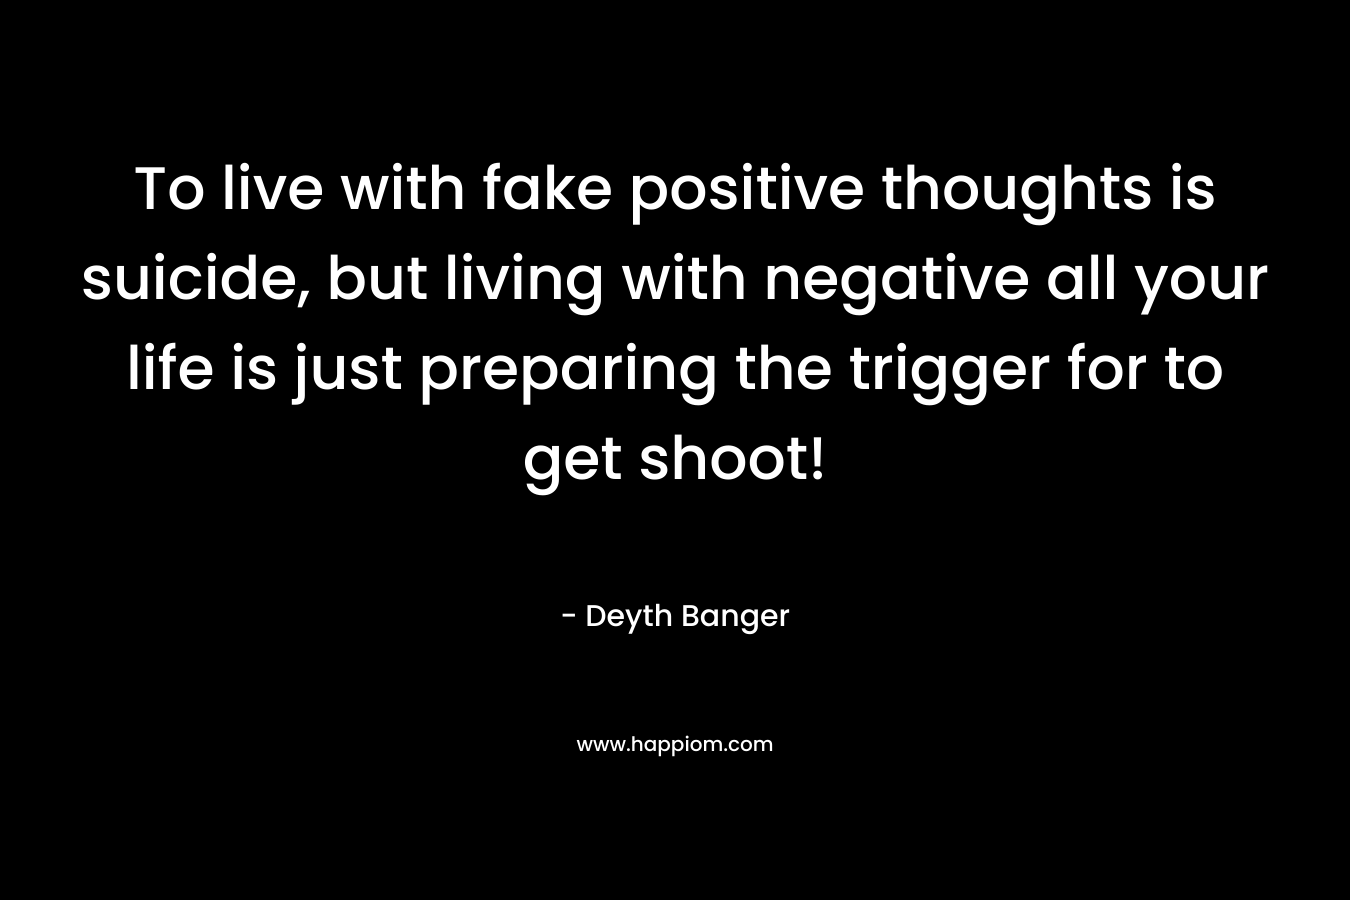 To live with fake positive thoughts is suicide, but living with negative all your life is just preparing the trigger for to get shoot! – Deyth Banger